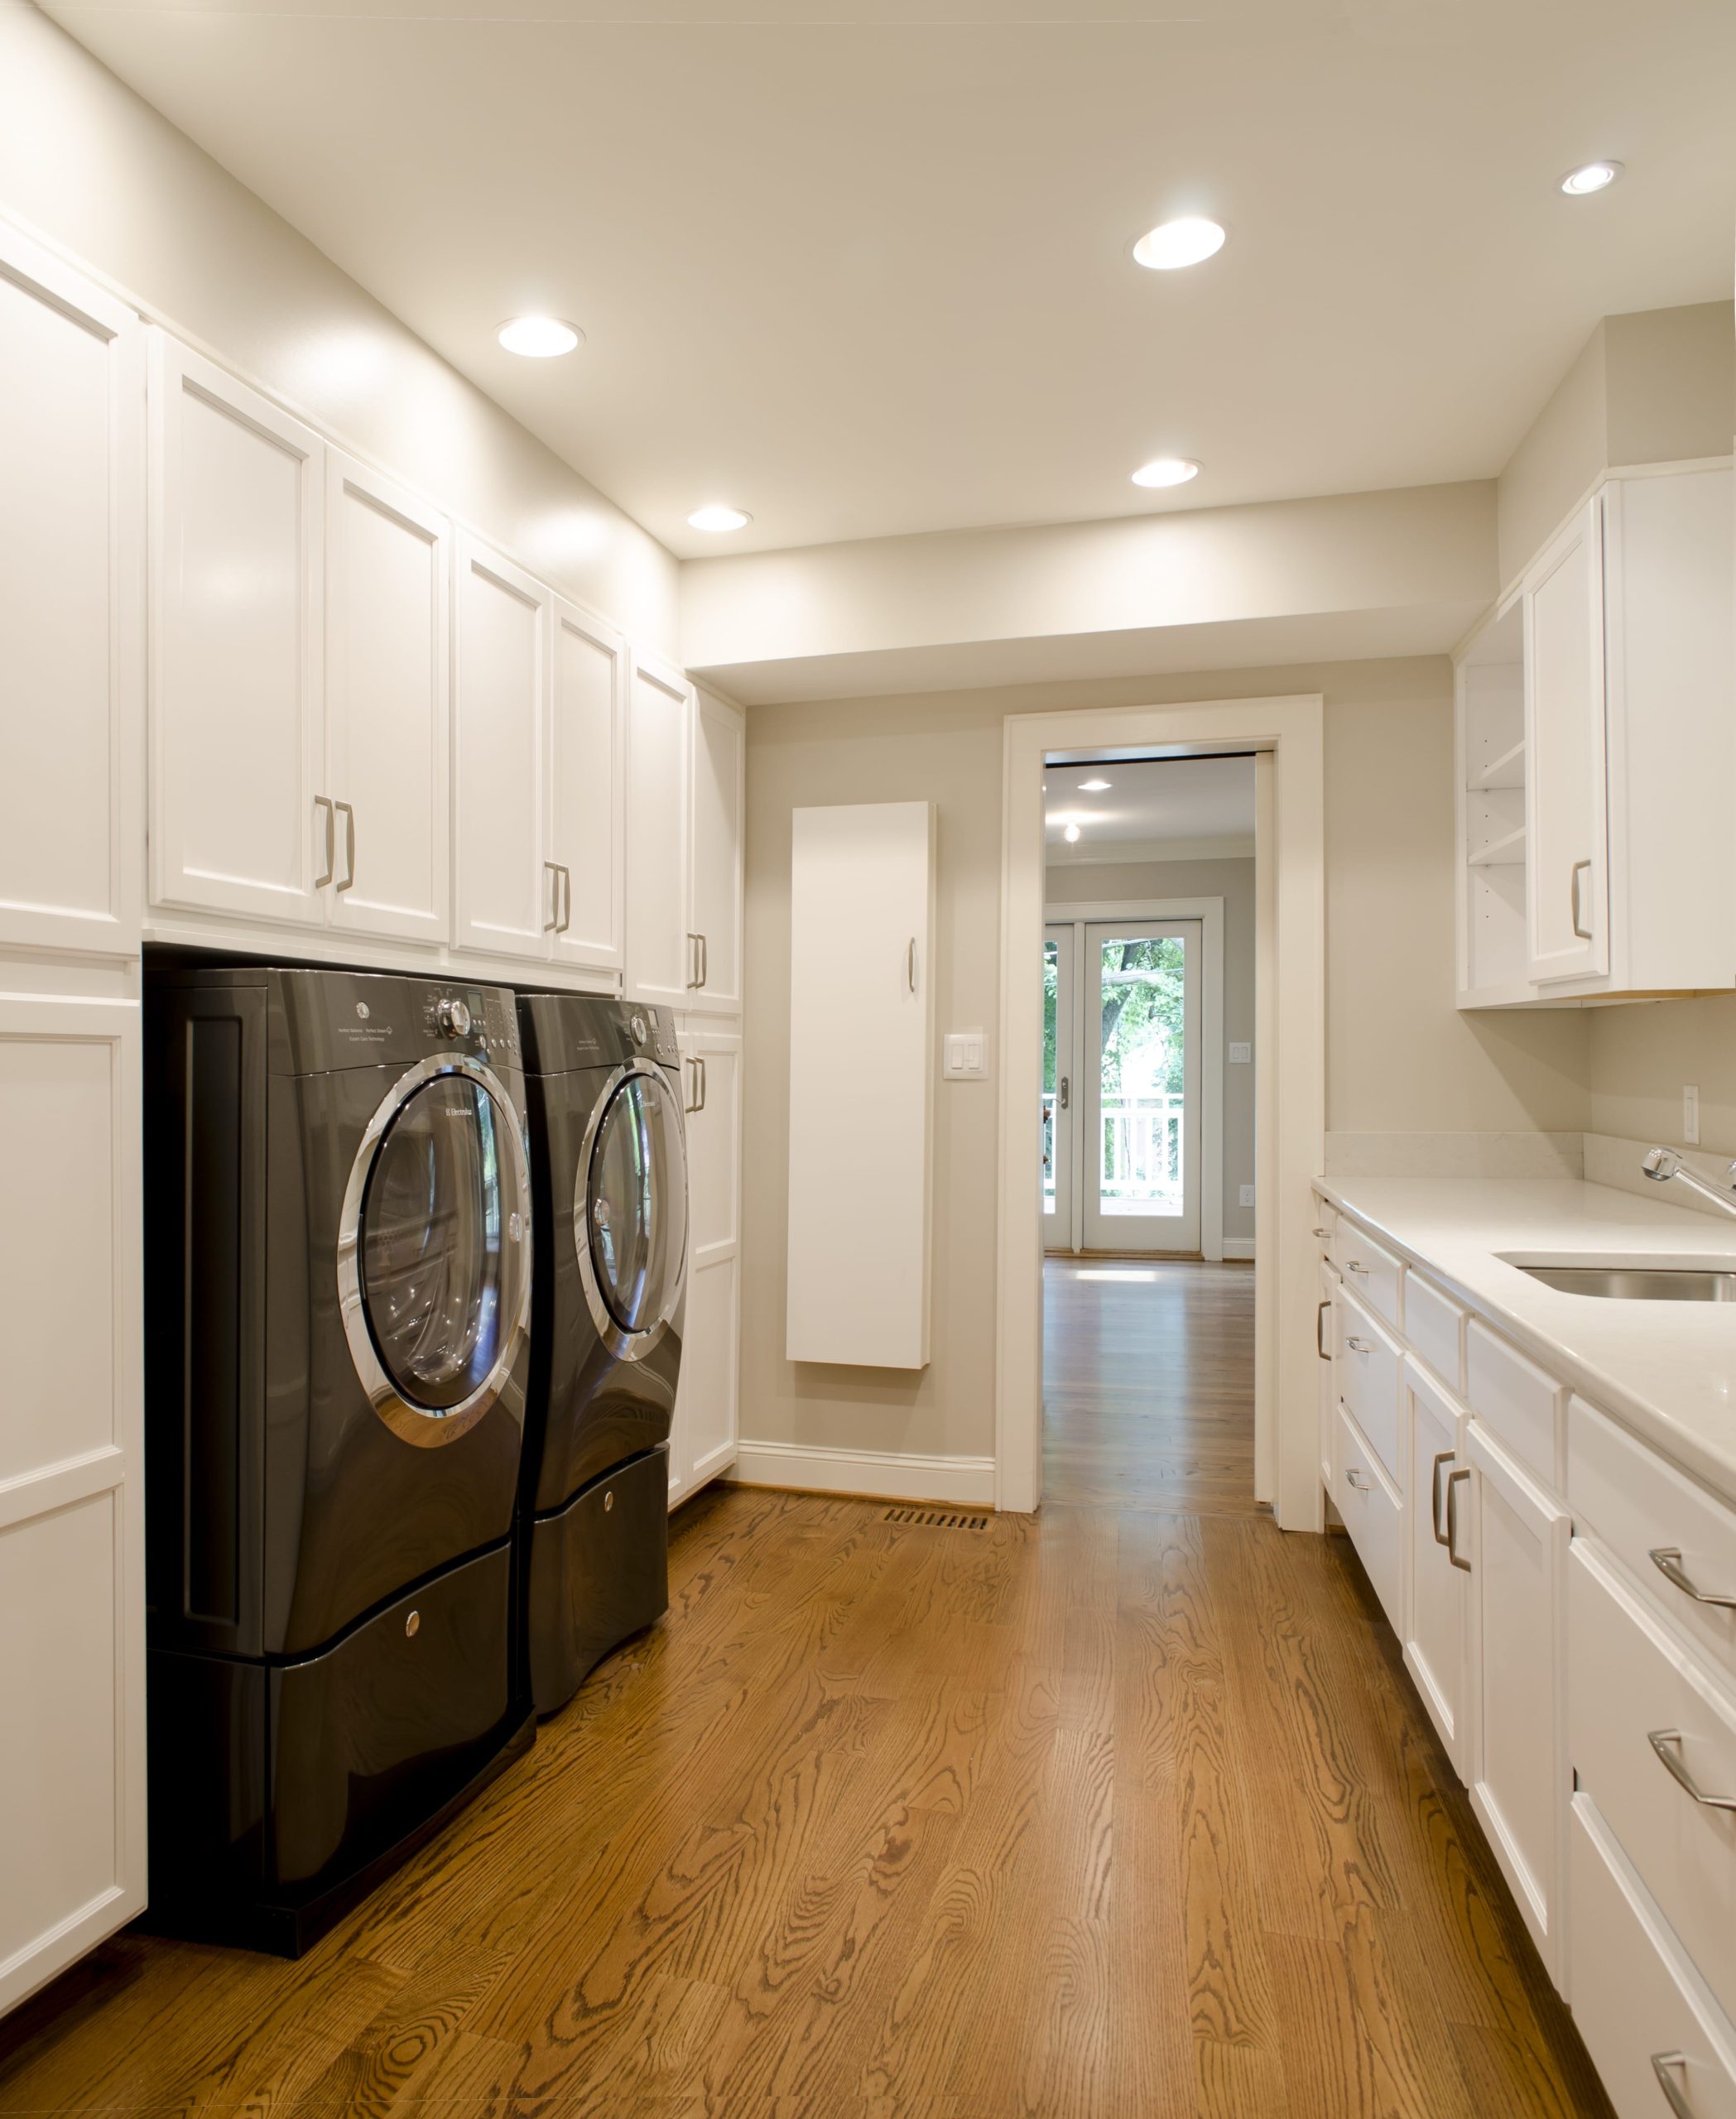 A clean and efficient laundry room with large built-in cabinets, shelves, counter space and deep sink